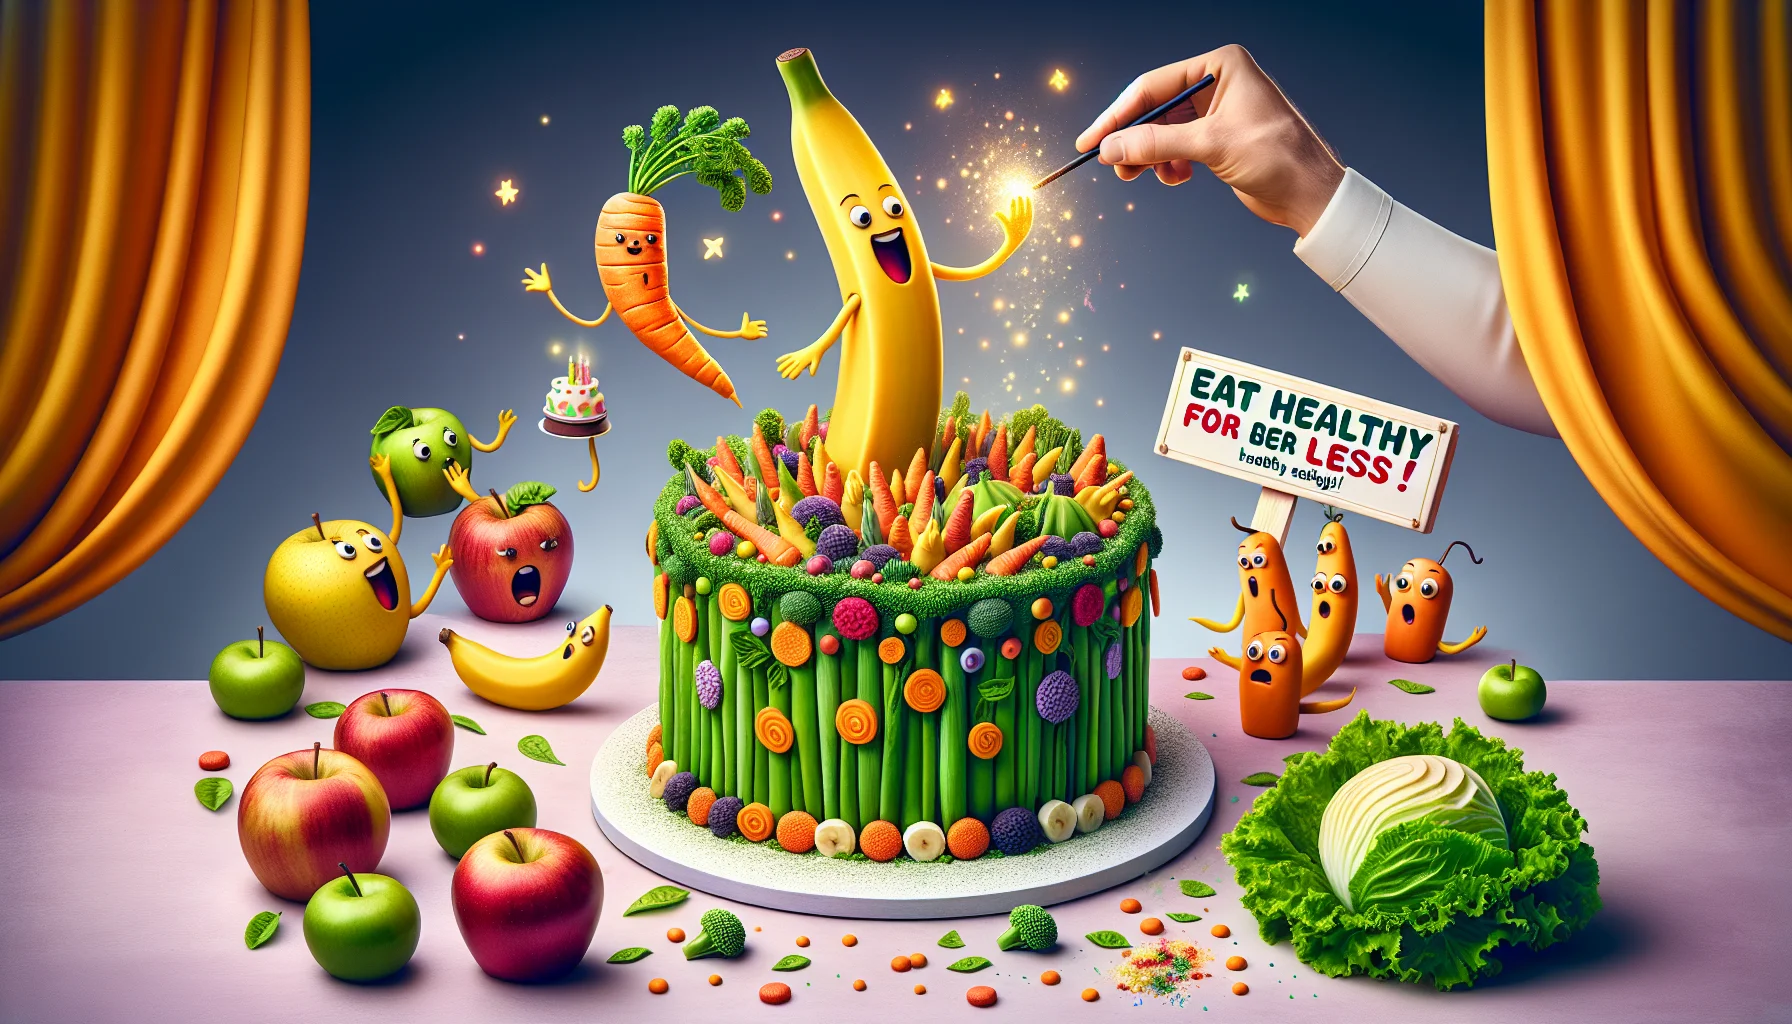 An imaginative scene showcasing a birthday cake, designed to look like a vibrant garden. This special cake is made out of various fruits and vegetables creating a unique and funny display. Around the cake, a banana is acting out a scene where it is using a carrot as a magic wand to transform the cake into a healthier version. Alongside, there are apples and green lettuce leaves acting as spectators, their expressions are filled with shock and surprise. There is also a value sign displayed, with text that reads 'Eat Healthy for Less!', suggesting the low cost of creating such nutritious delightful treats.